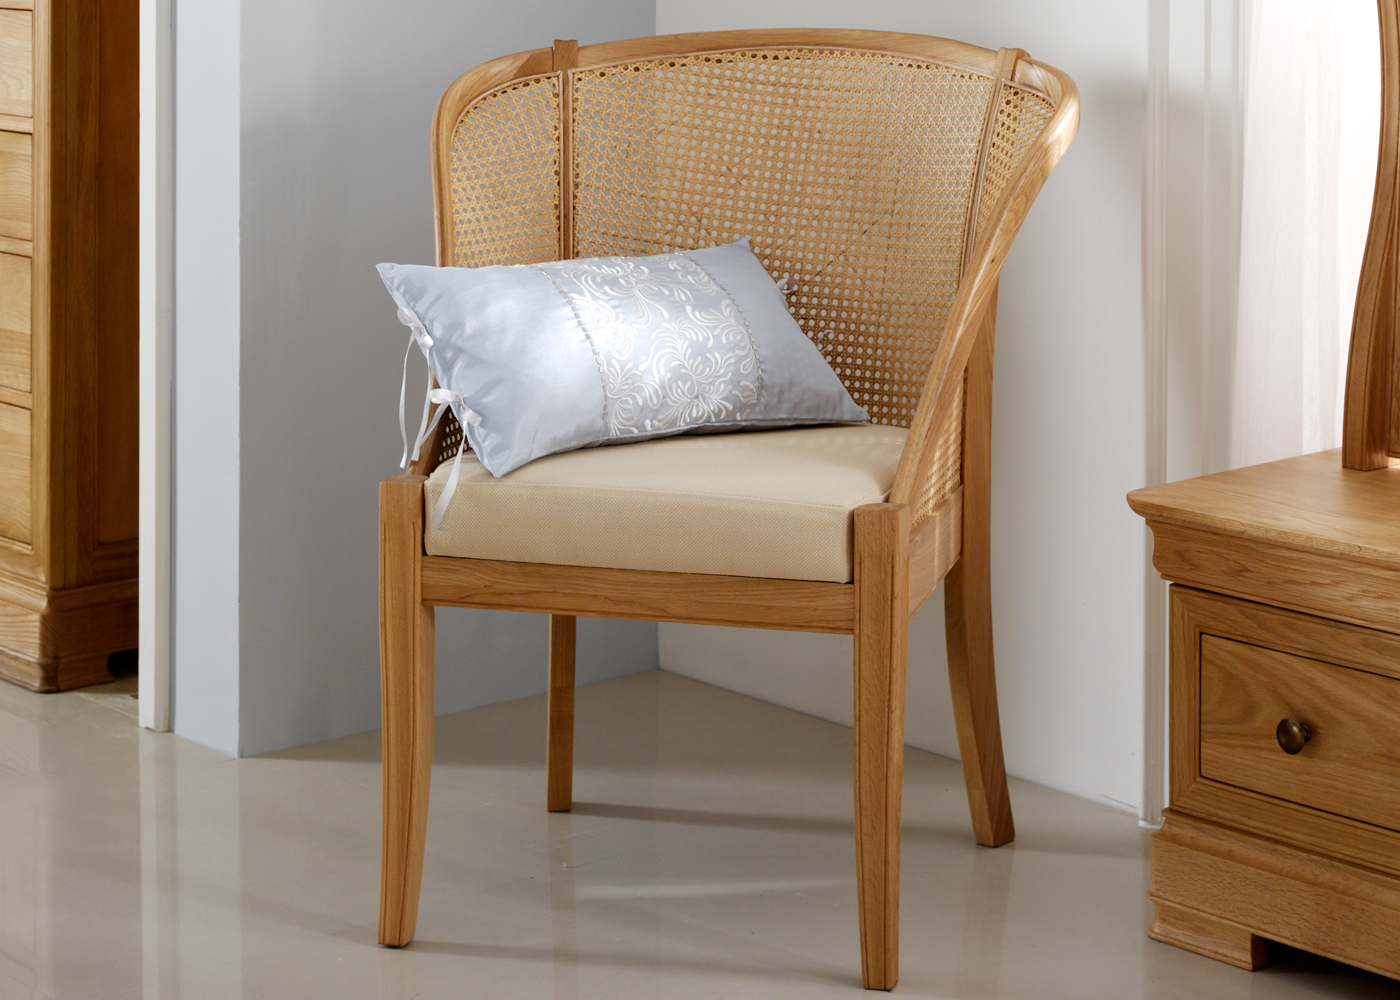 furniture village small bedroom chairs